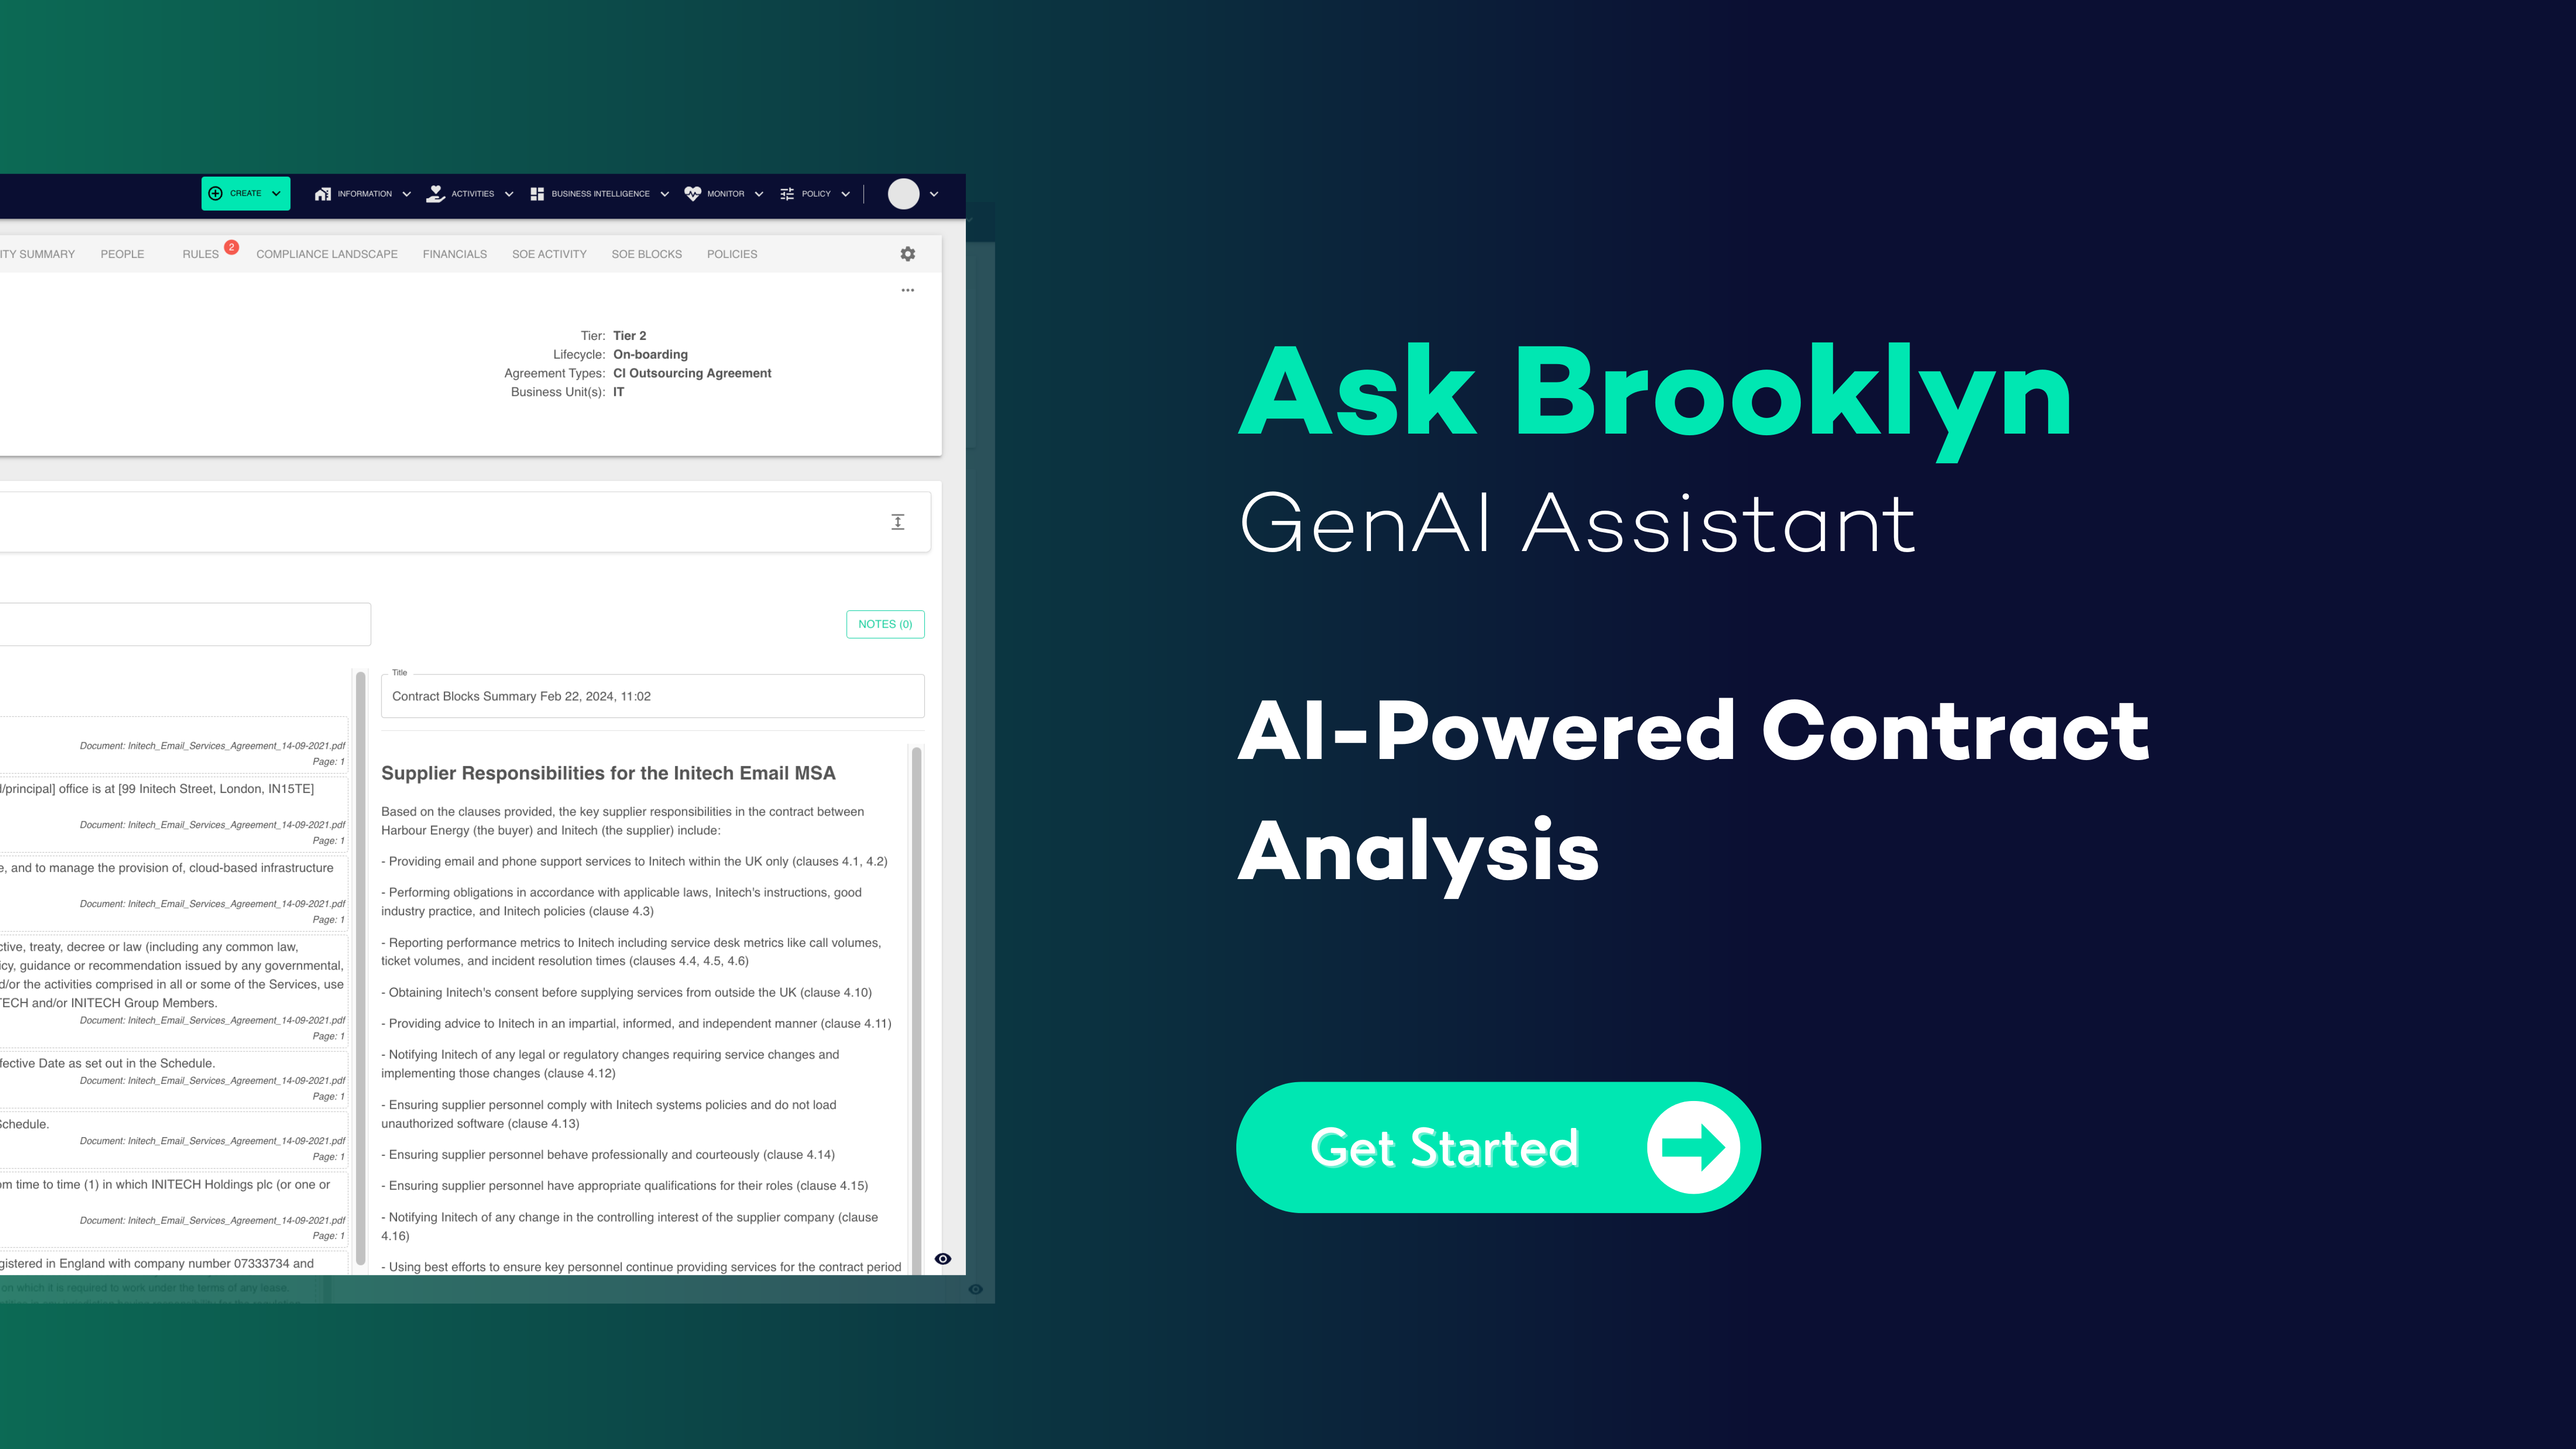 Brooklyn’s AI-Automated Contract Analysis image